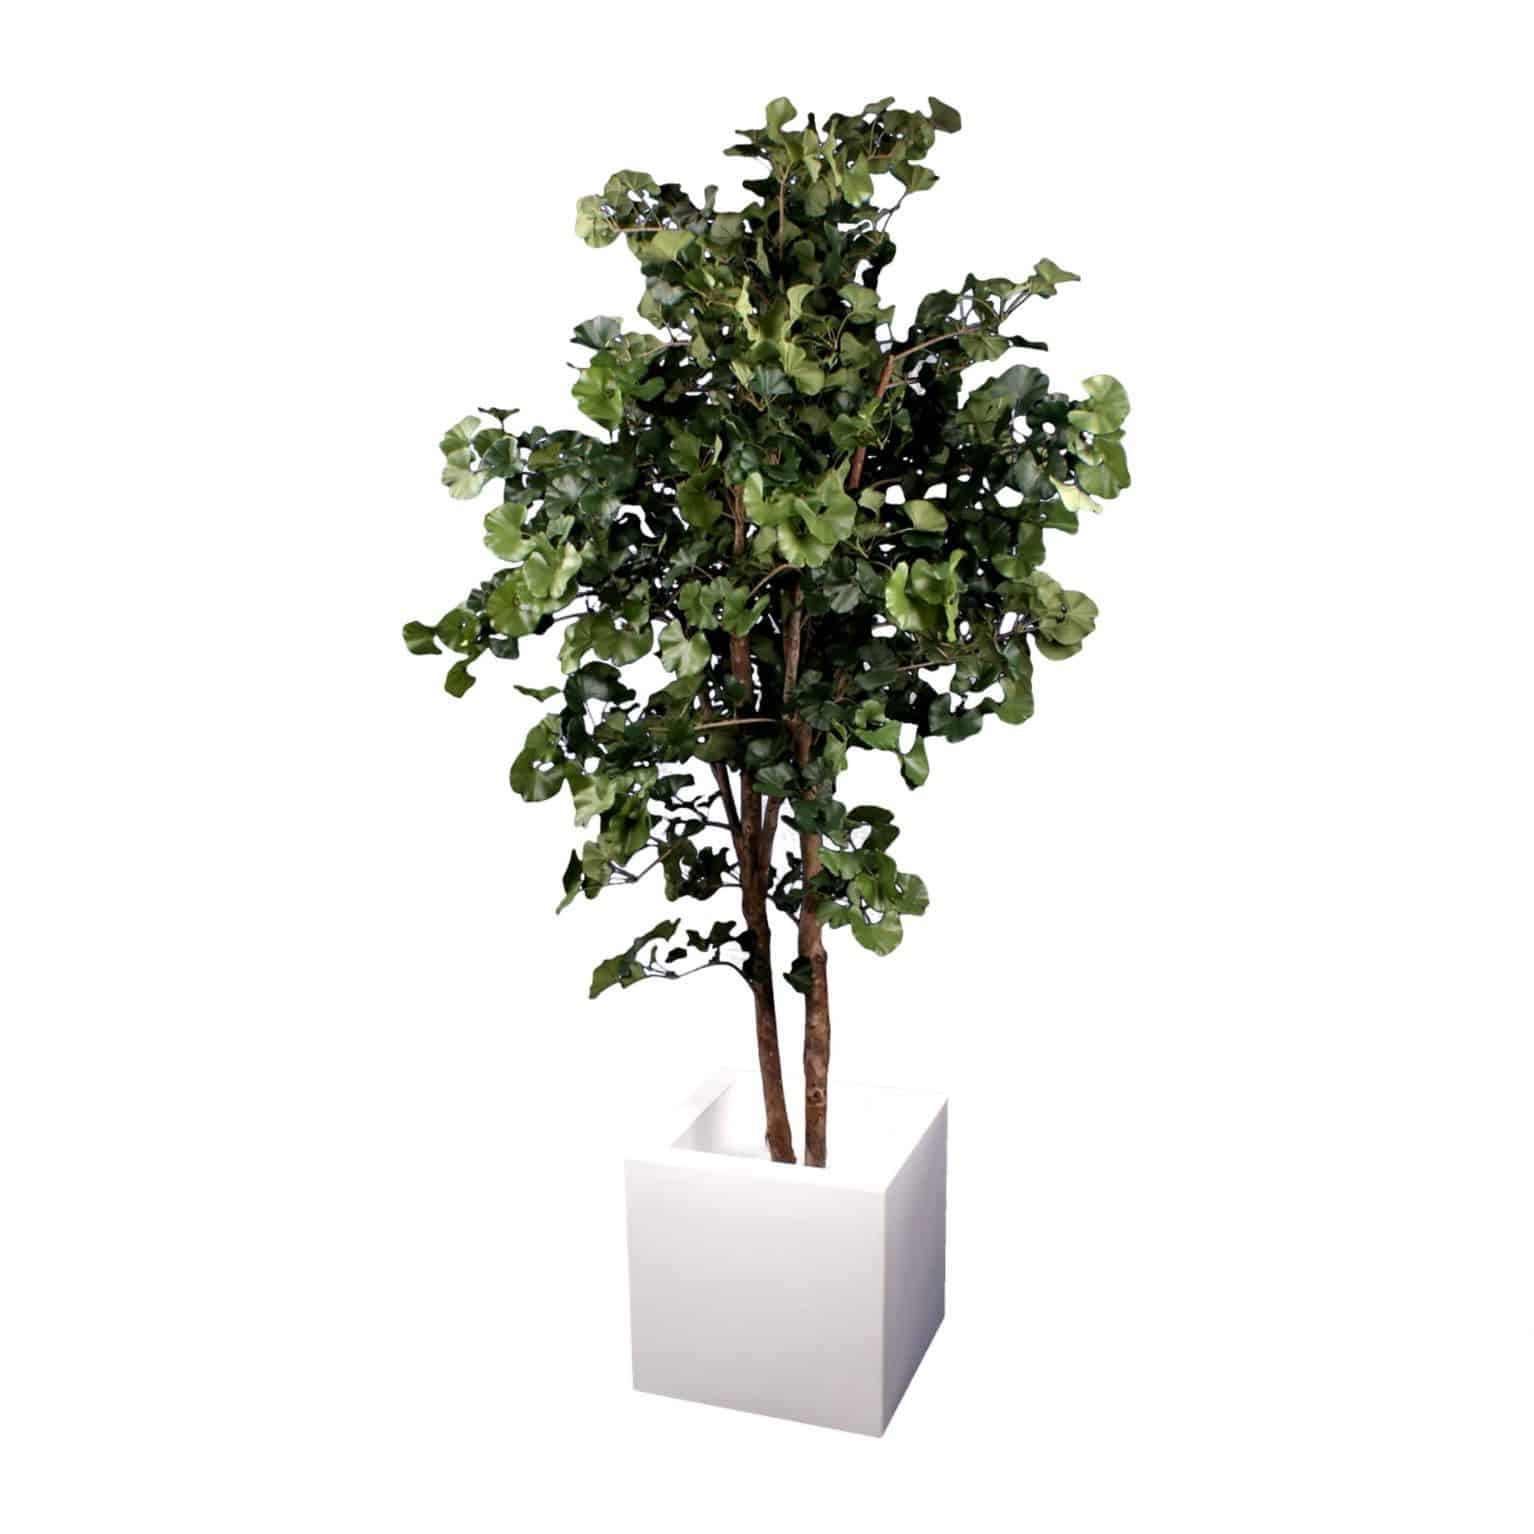 Shop for our artificial ginkgo tree with real tree bark trunk and natural colouring. In a versatile modern white pot. Soil free ideal for oriental gardens.